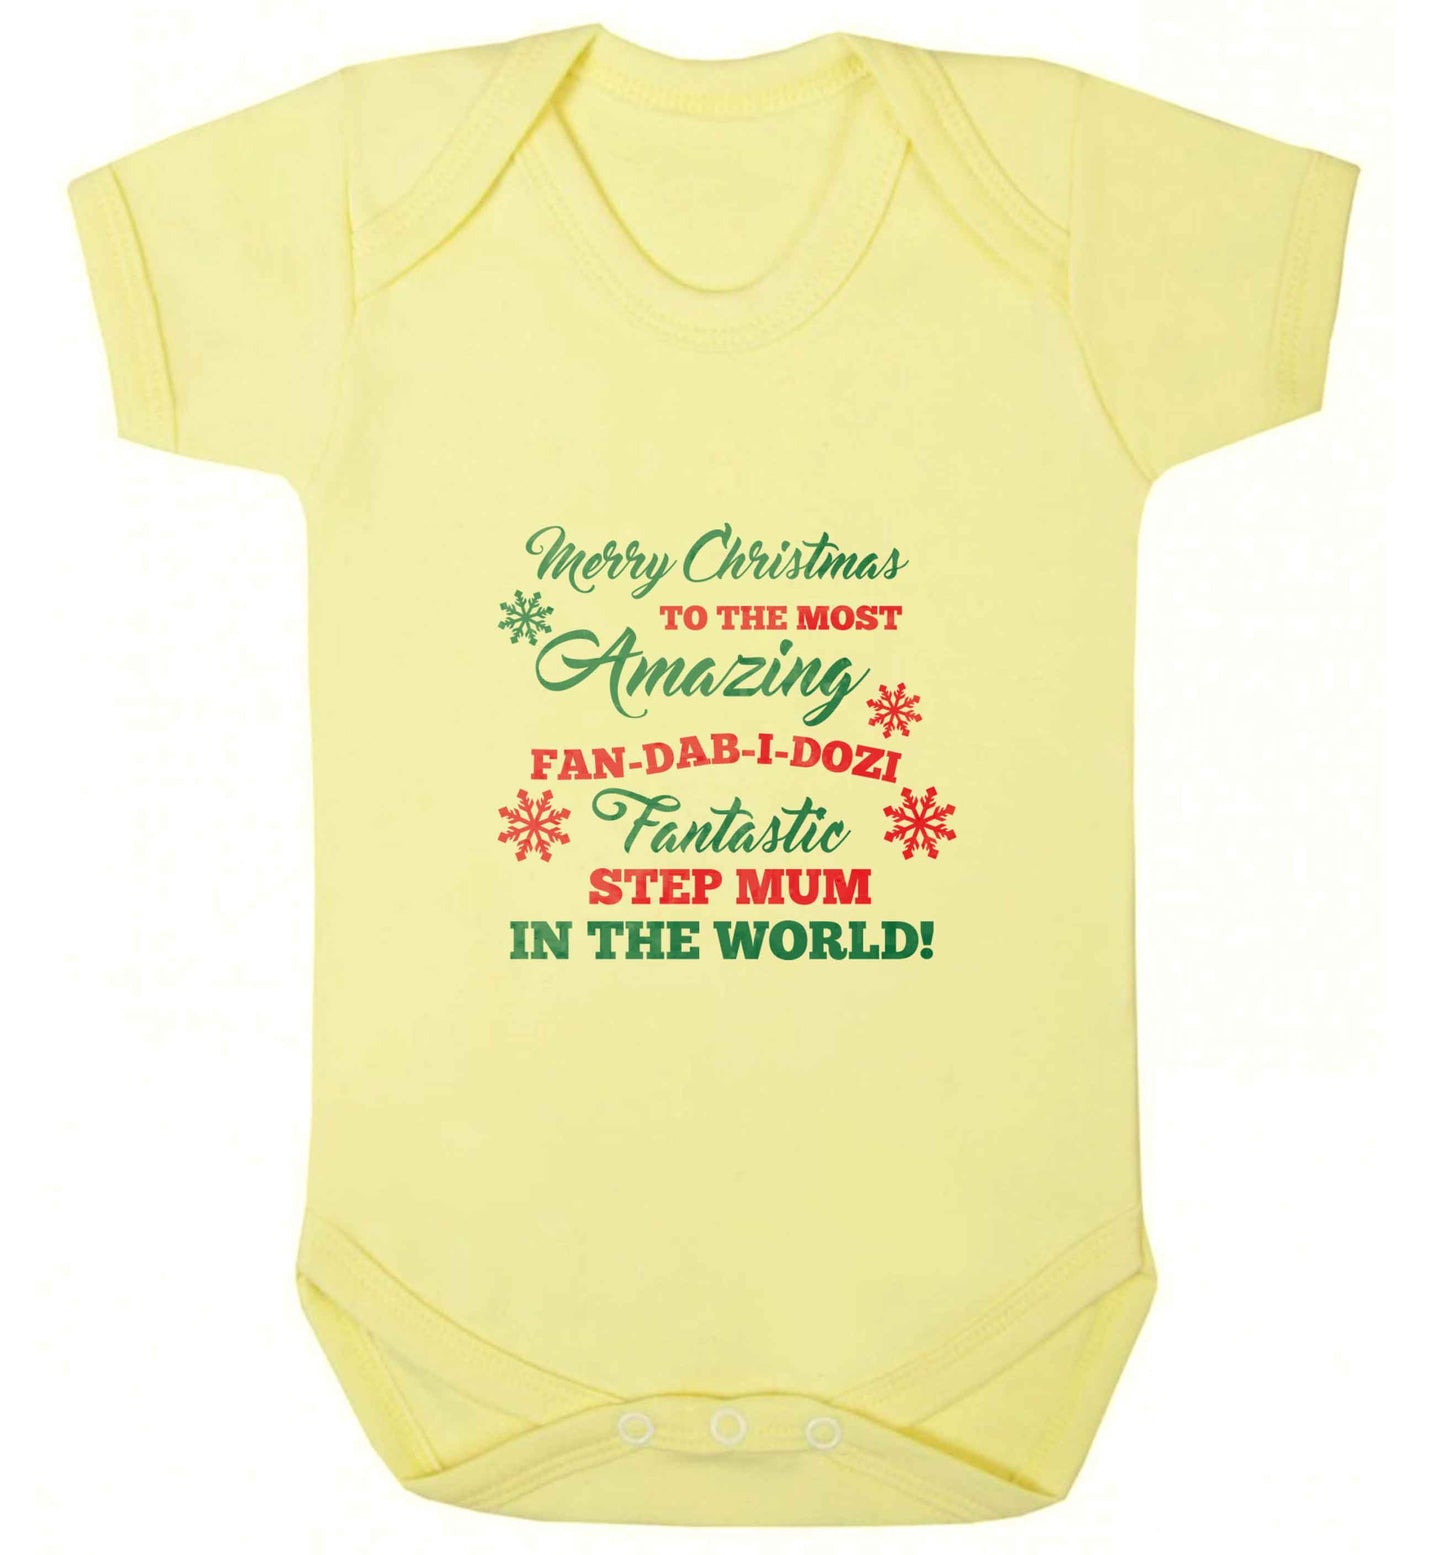 Merry Christmas to the most amazing fan-dab-i-dozi fantasic Step Mum in the world baby vest pale yellow 18-24 months